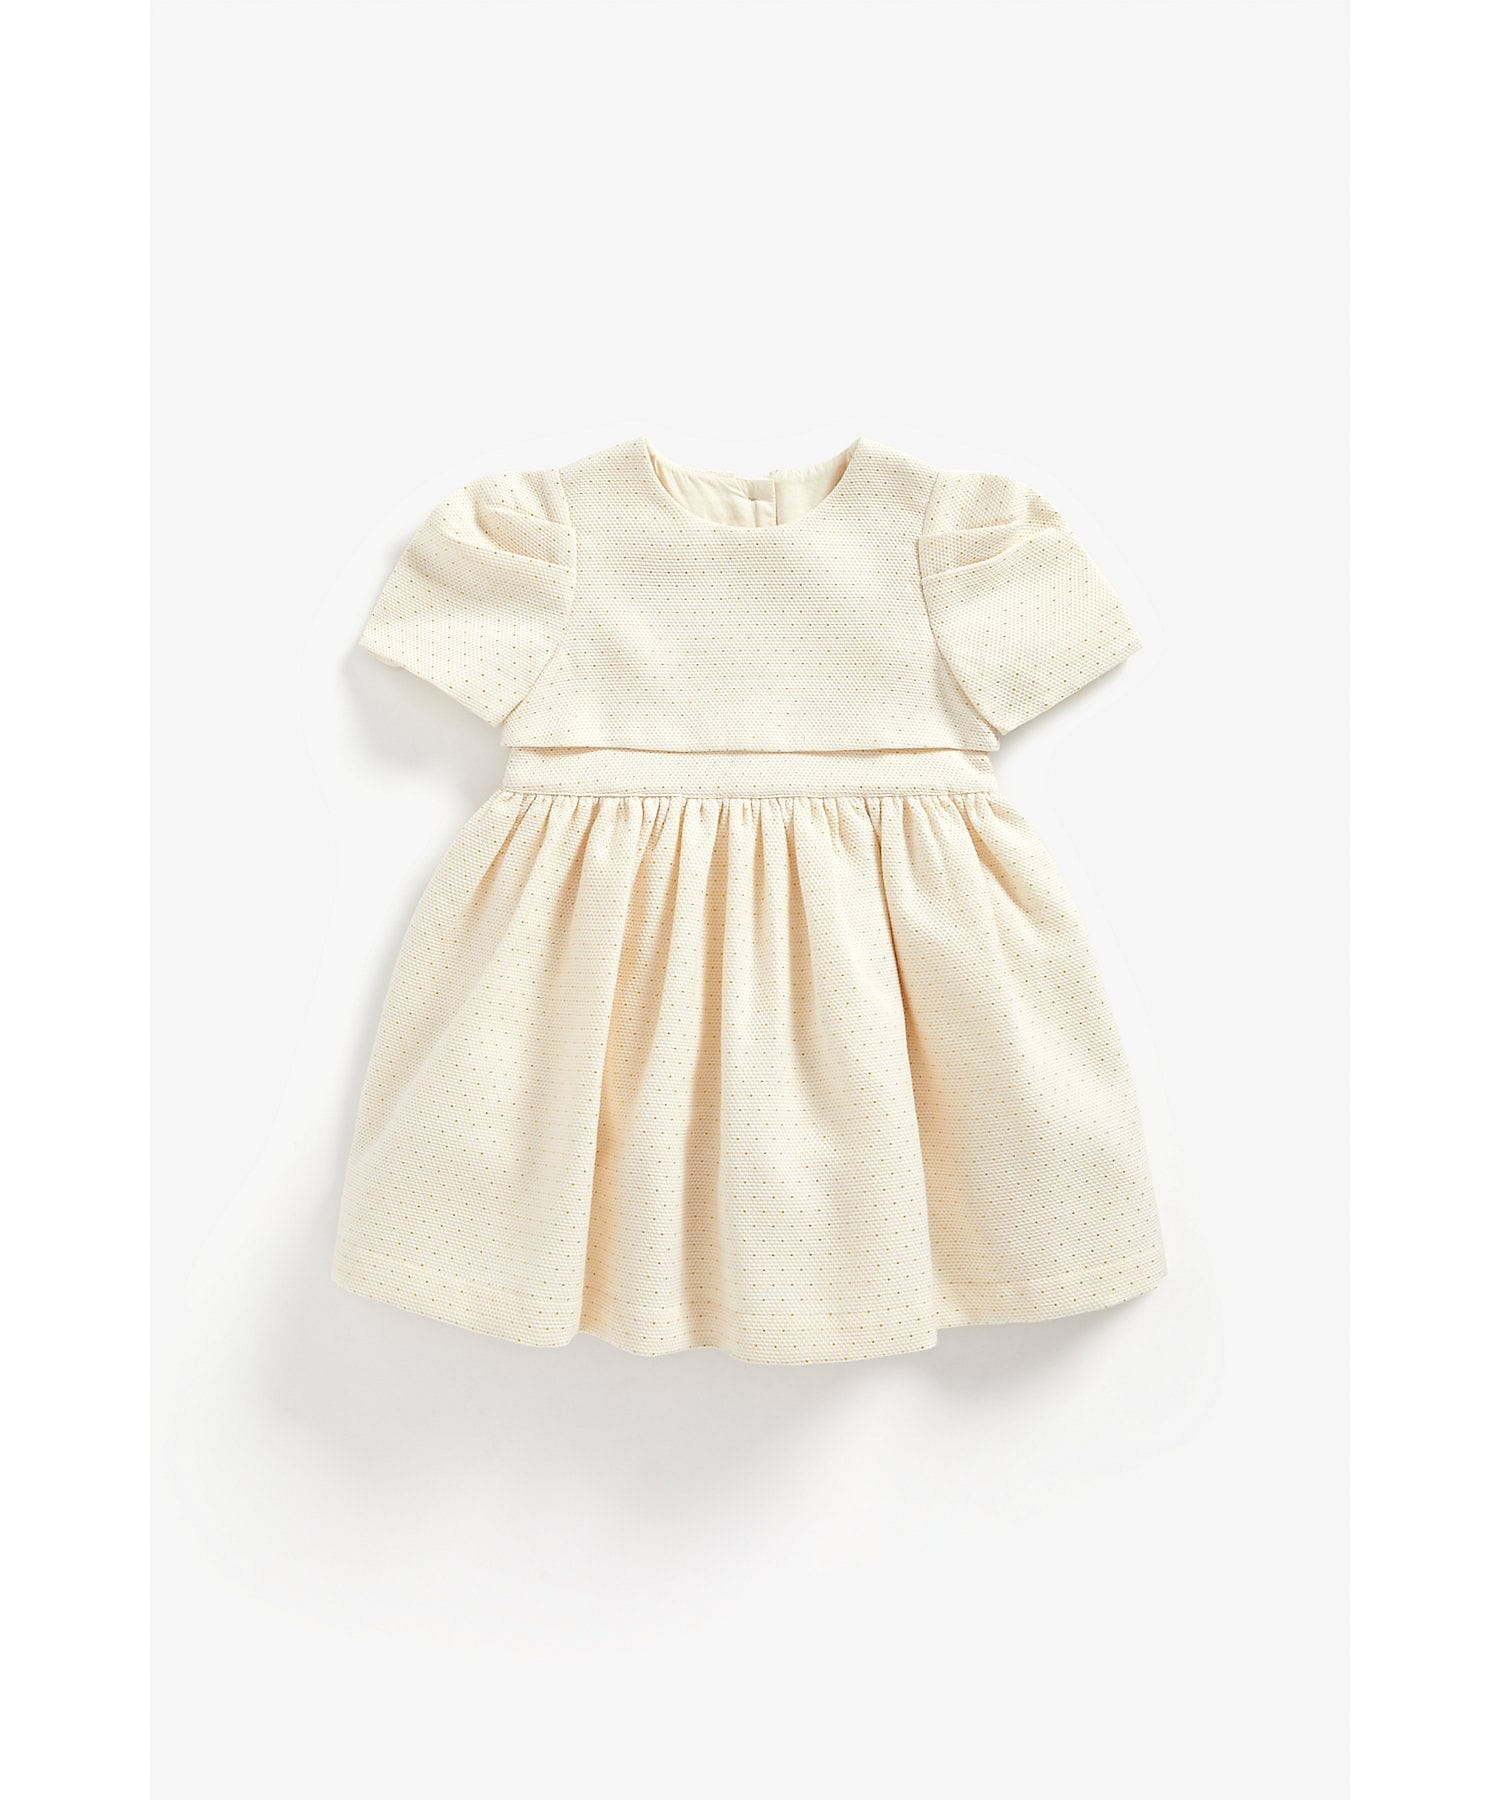 Mothercare | Girls Half Sleeves Party Dress With Bow - Cream 0